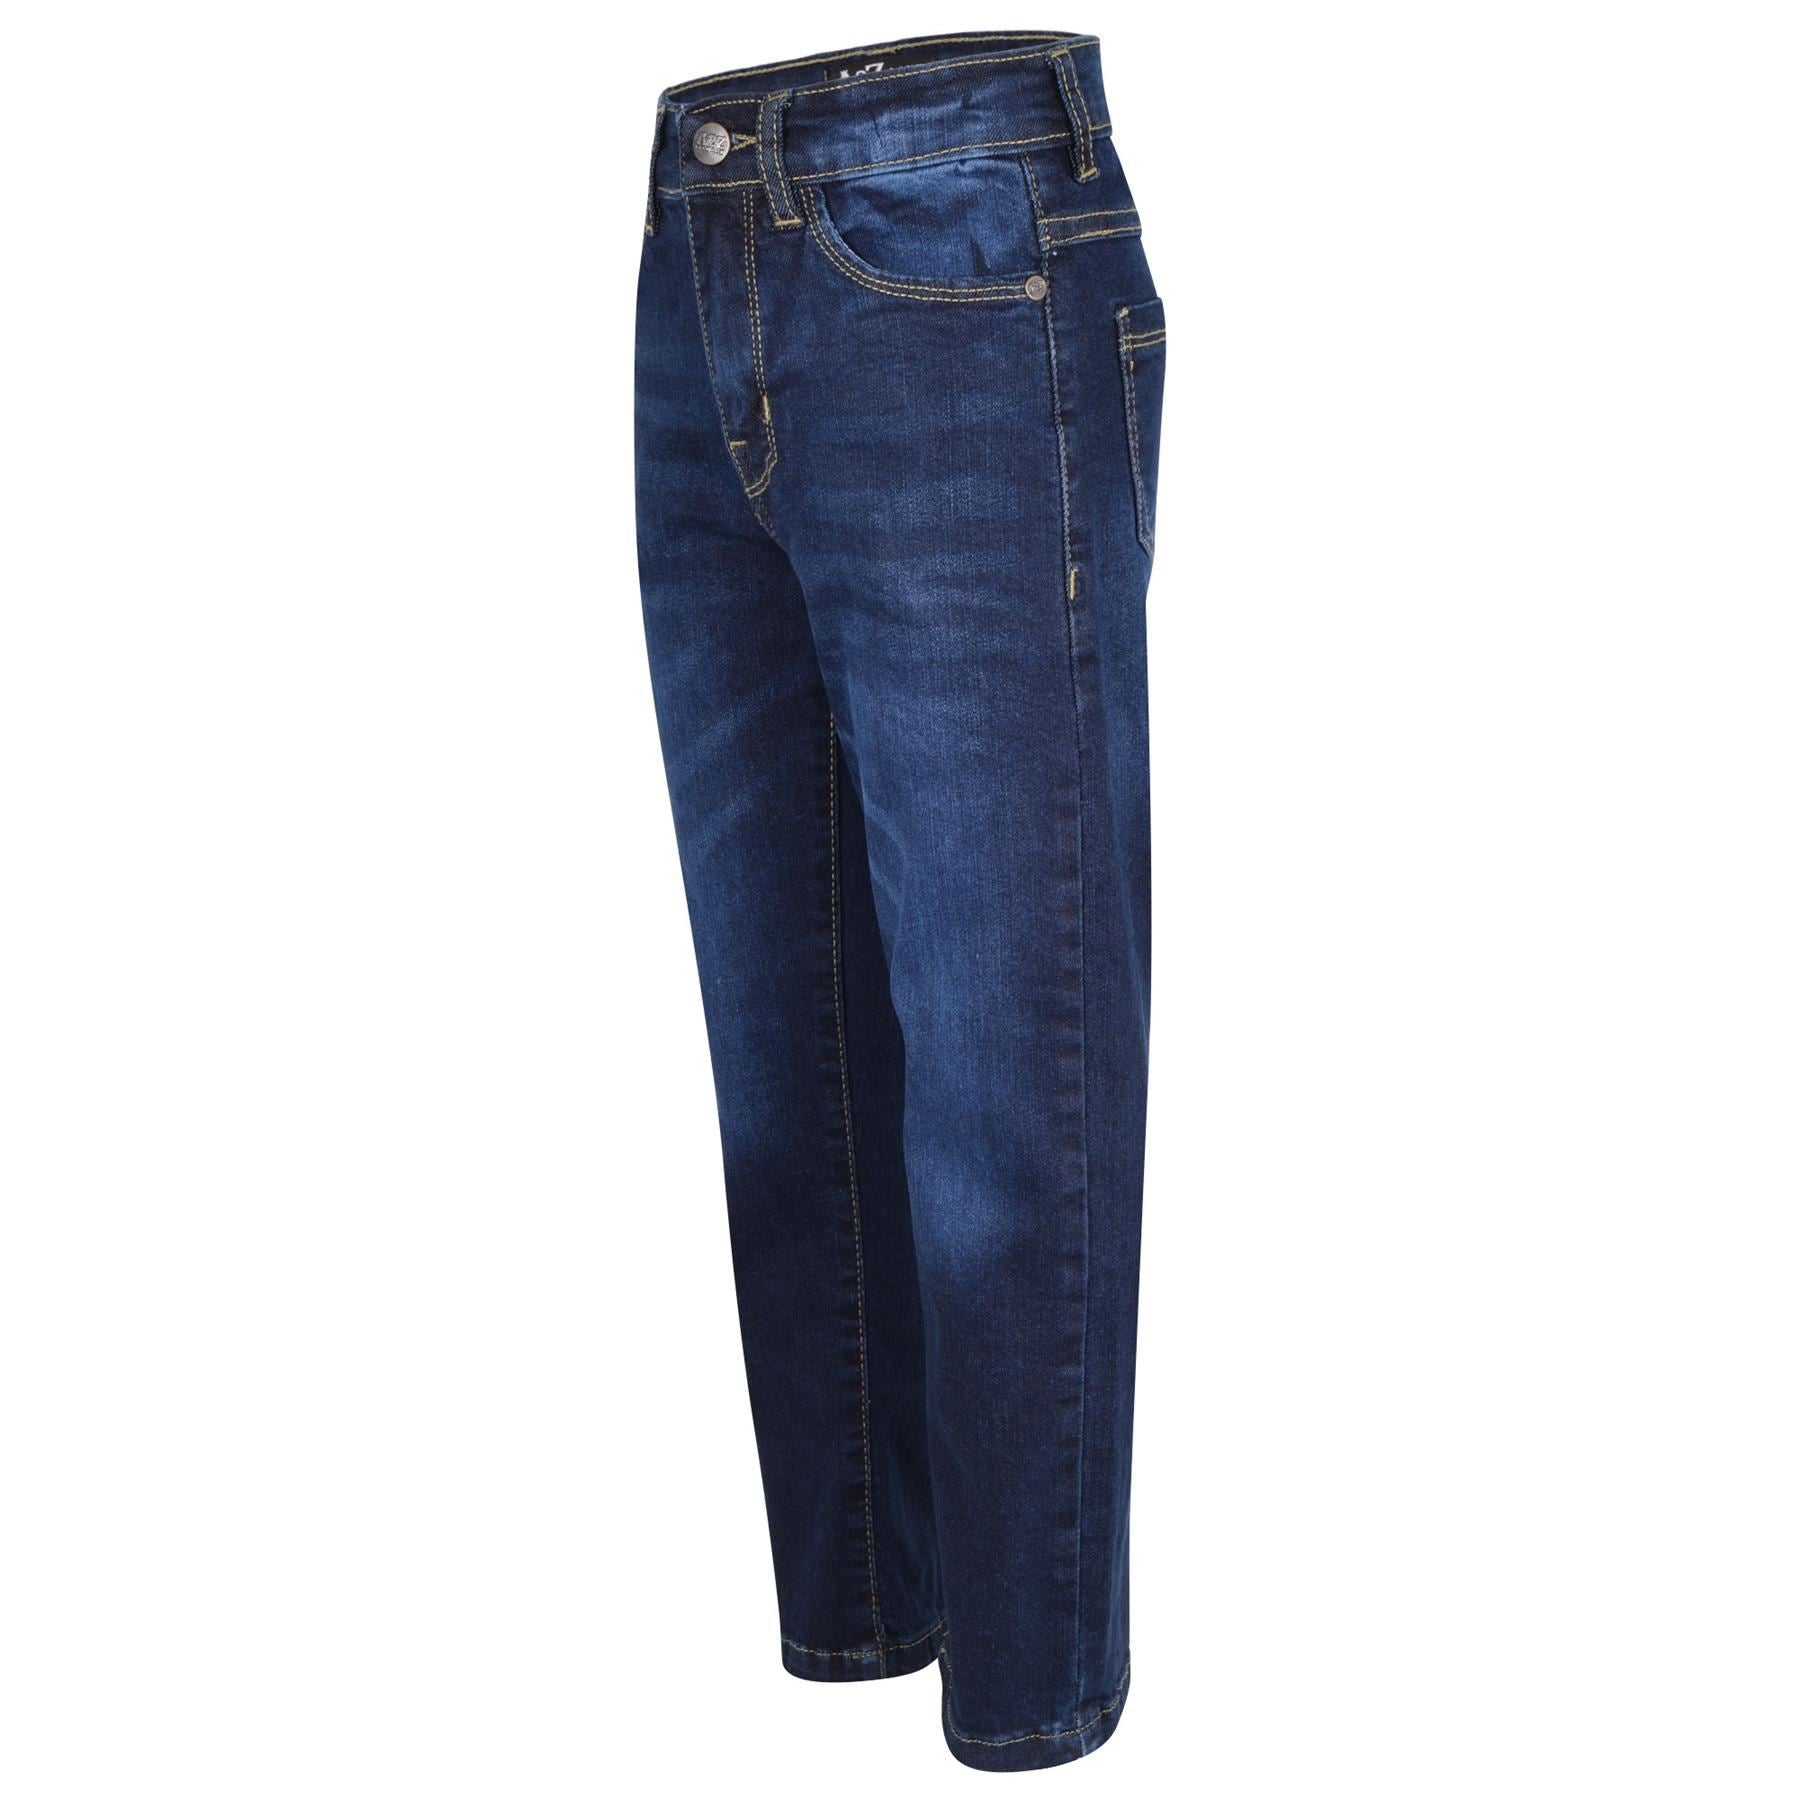 Kids Boys Relaxed Straight Fit Boot Cut Dark Blue Jeans